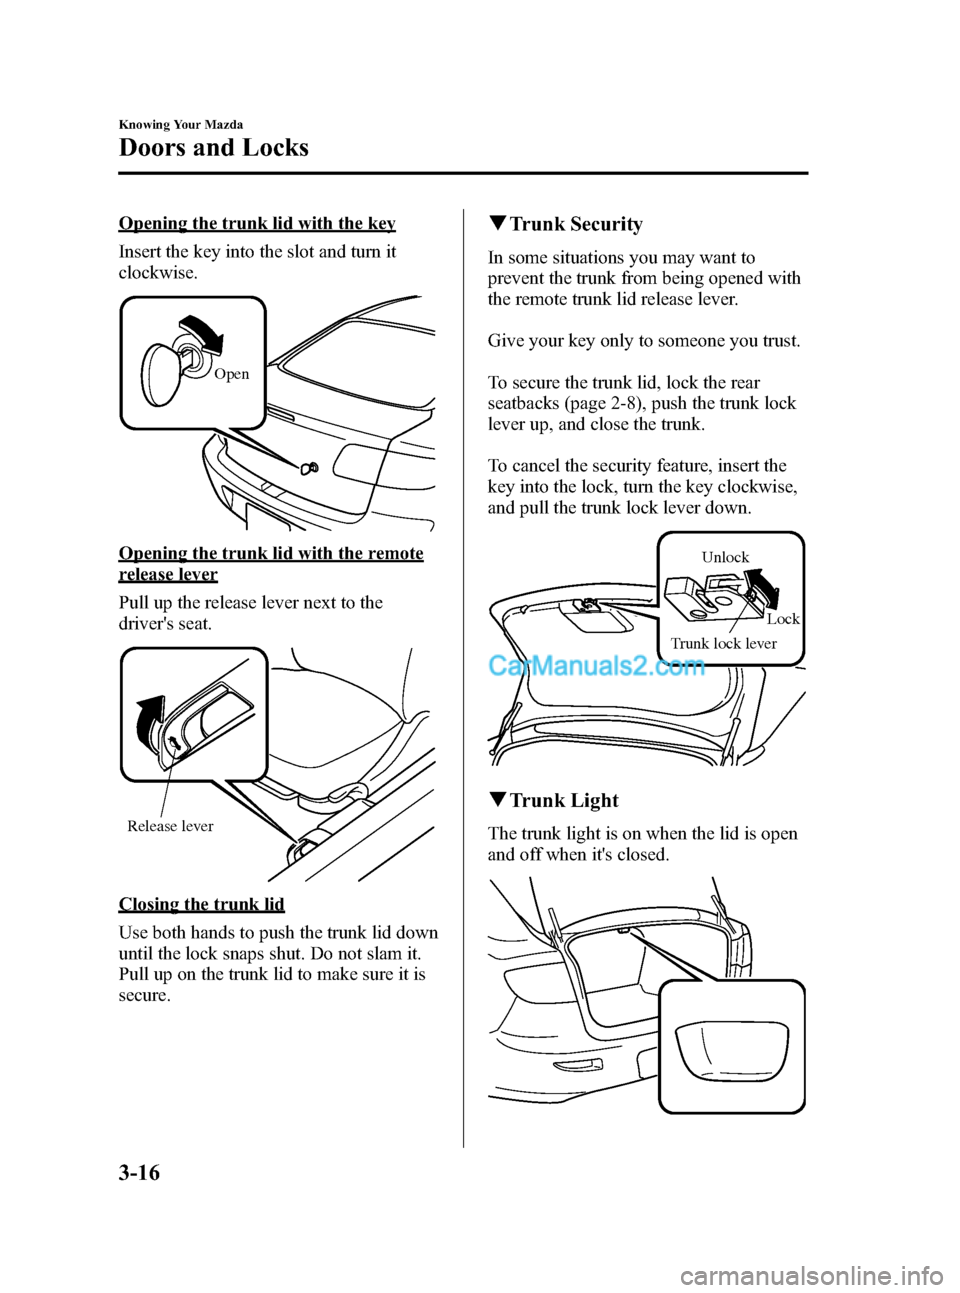 MAZDA MODEL MAZDASPEED 3 2007  Owners Manual (in English) Black plate (90,1)
Opening the trunk lid with the key
Insert the key into the slot and turn it
clockwise.
Open
Opening the trunk lid with the remote
release lever
Pull up the release lever next to the